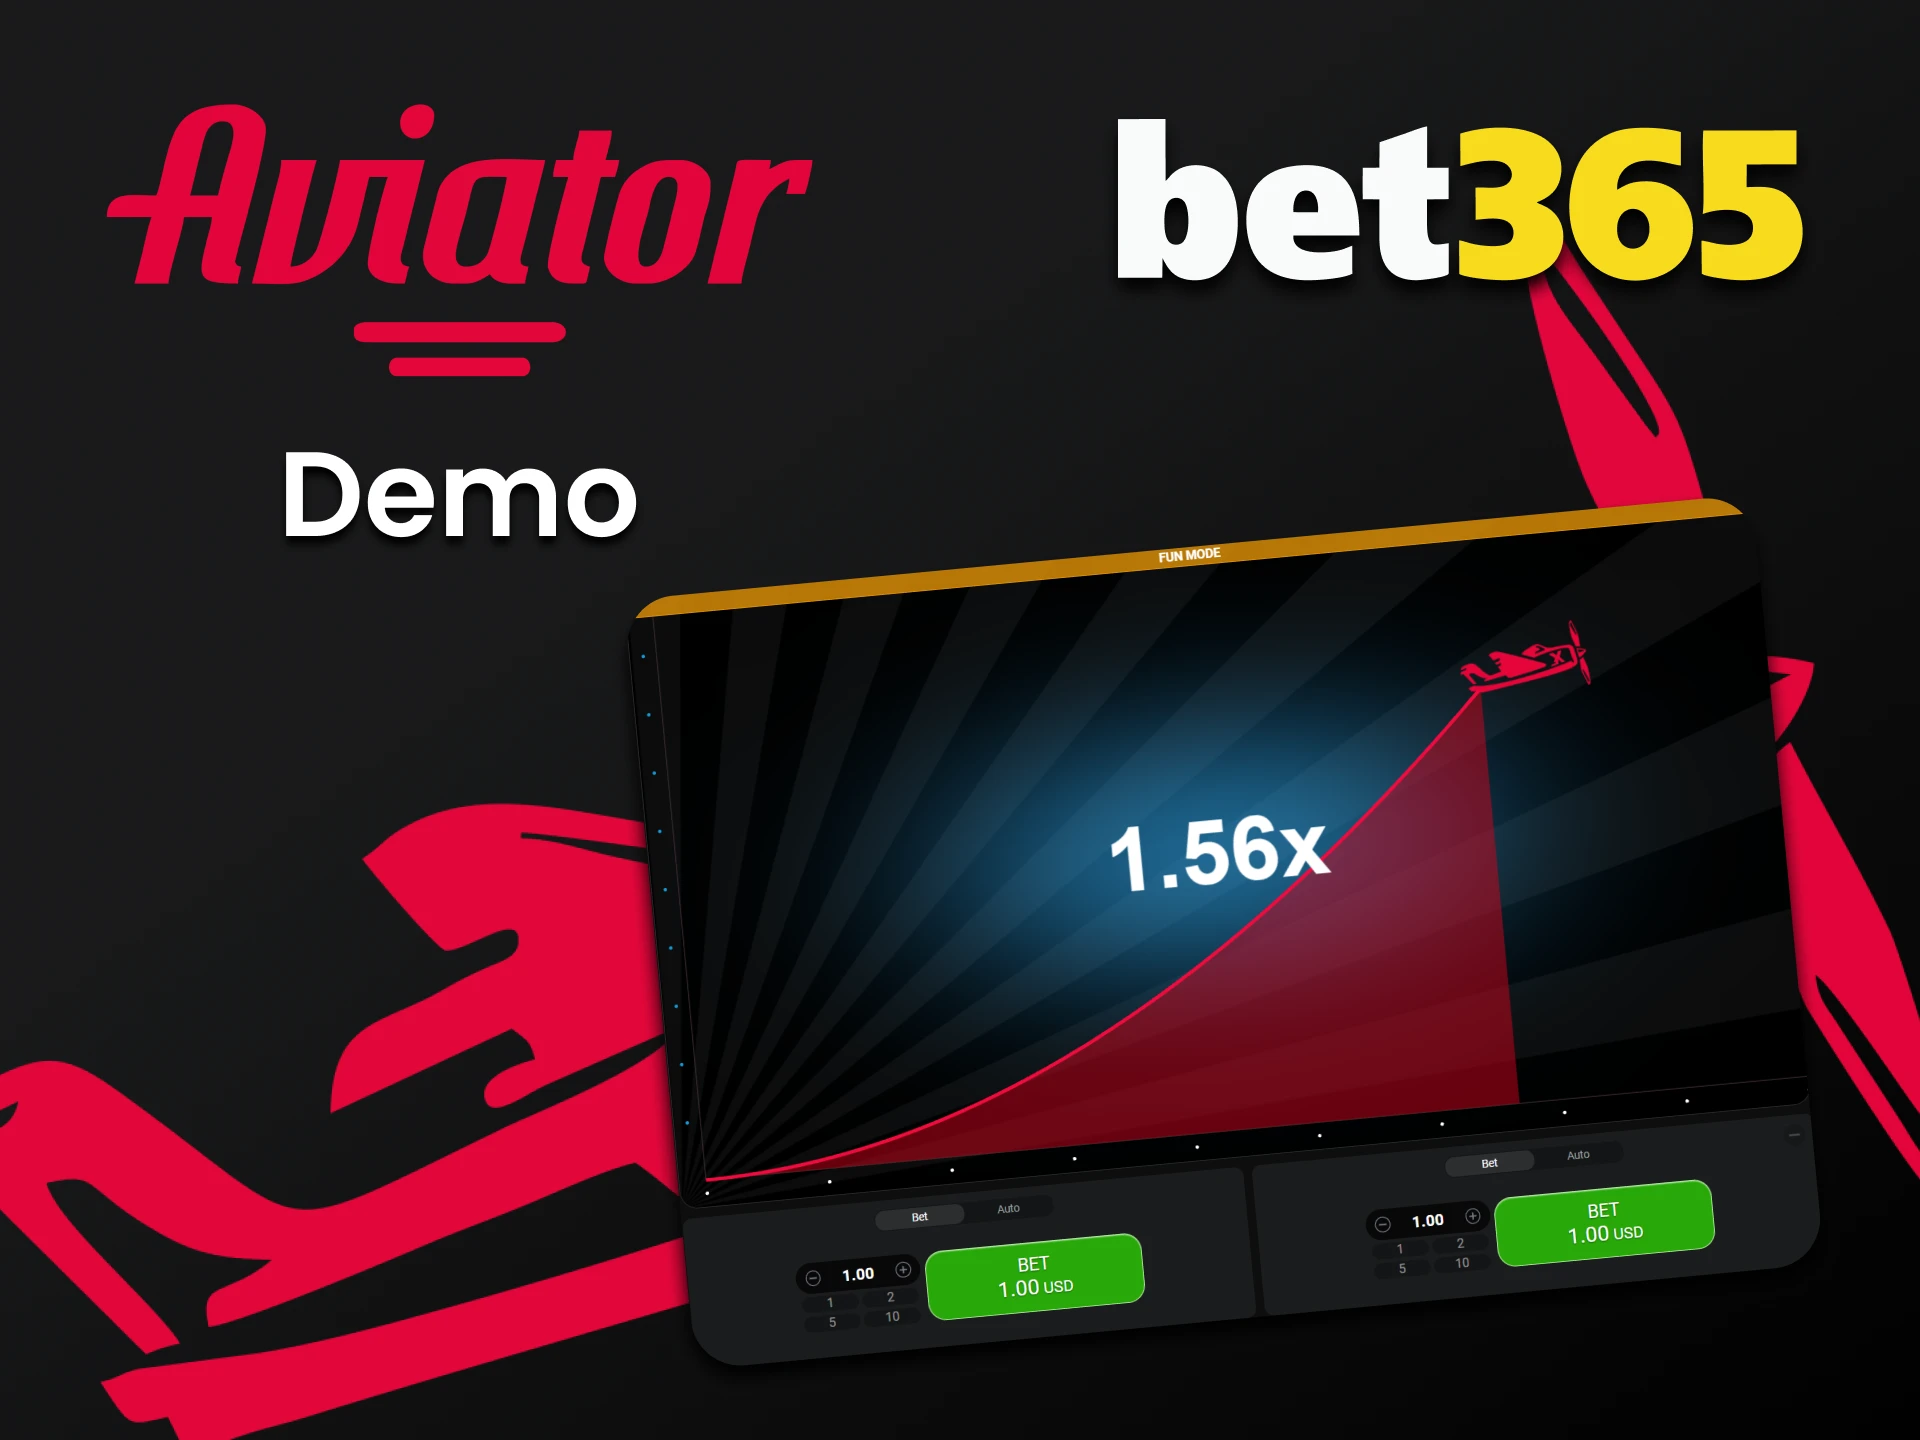 For training in Aviator there is a special version of the game on Bet365.